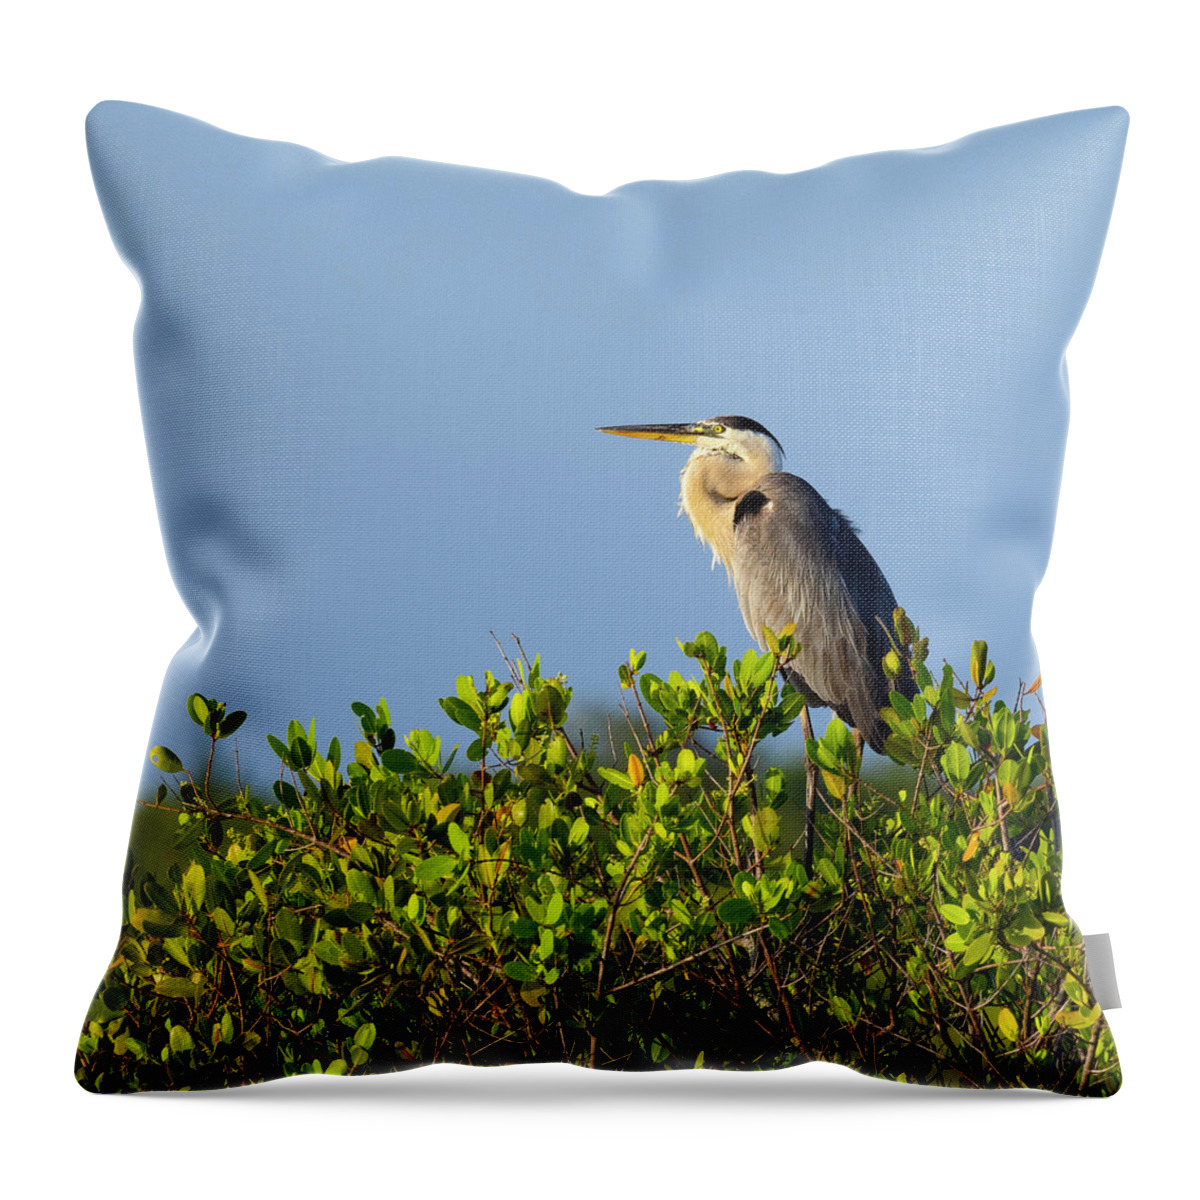 R5-2618 Throw Pillow featuring the photograph Perched by Gordon Elwell